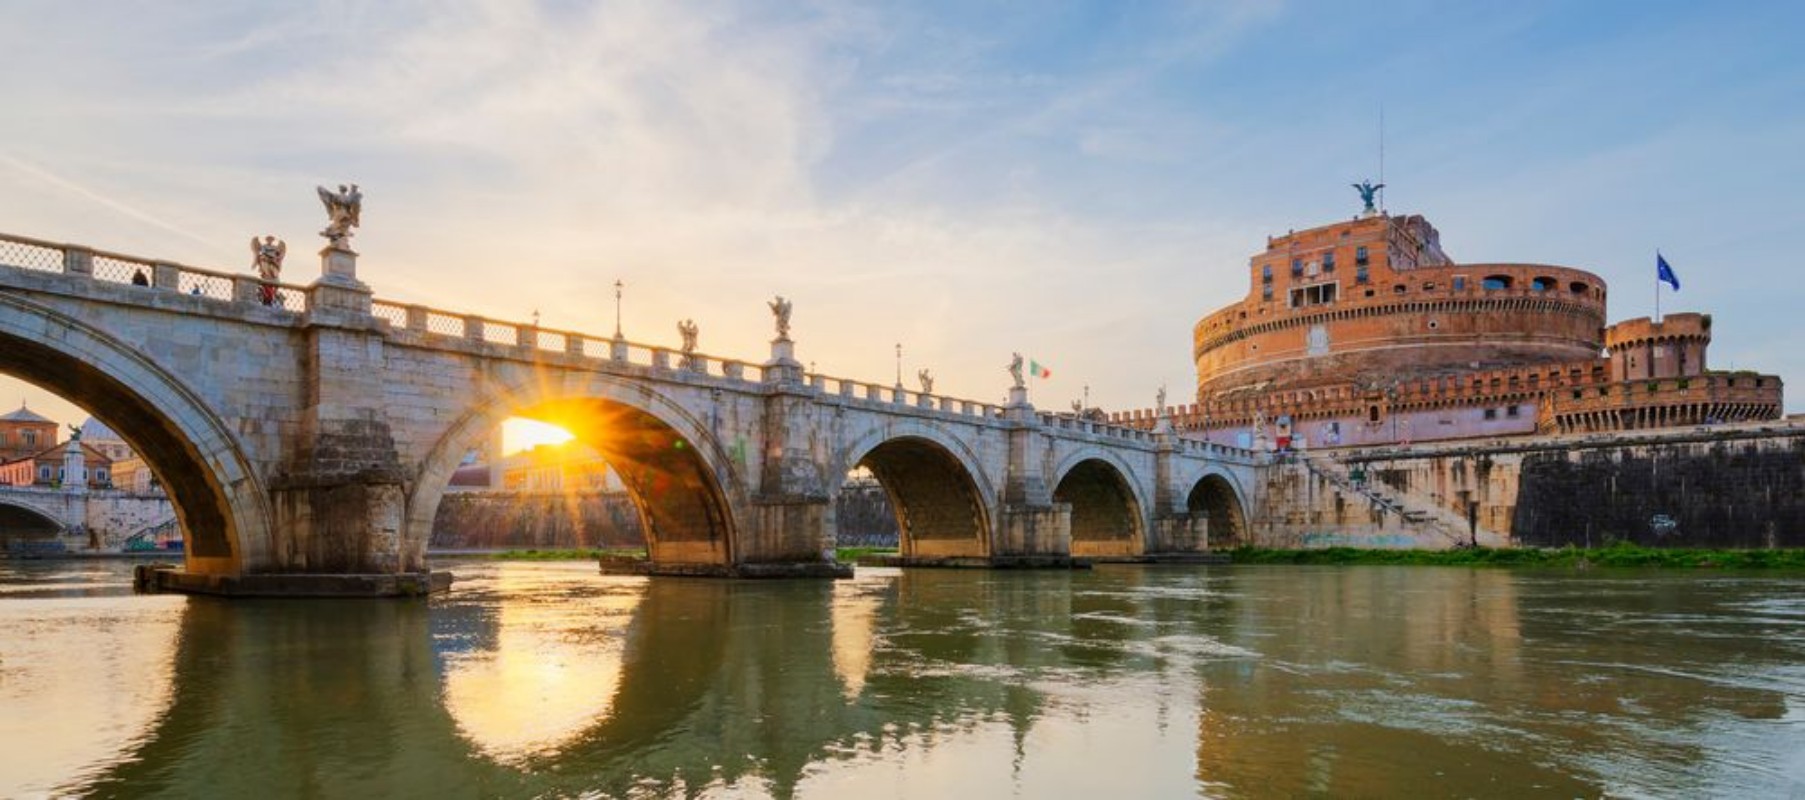 Image de Holy Angel Bridge over the Tiber River in Rome at sunset